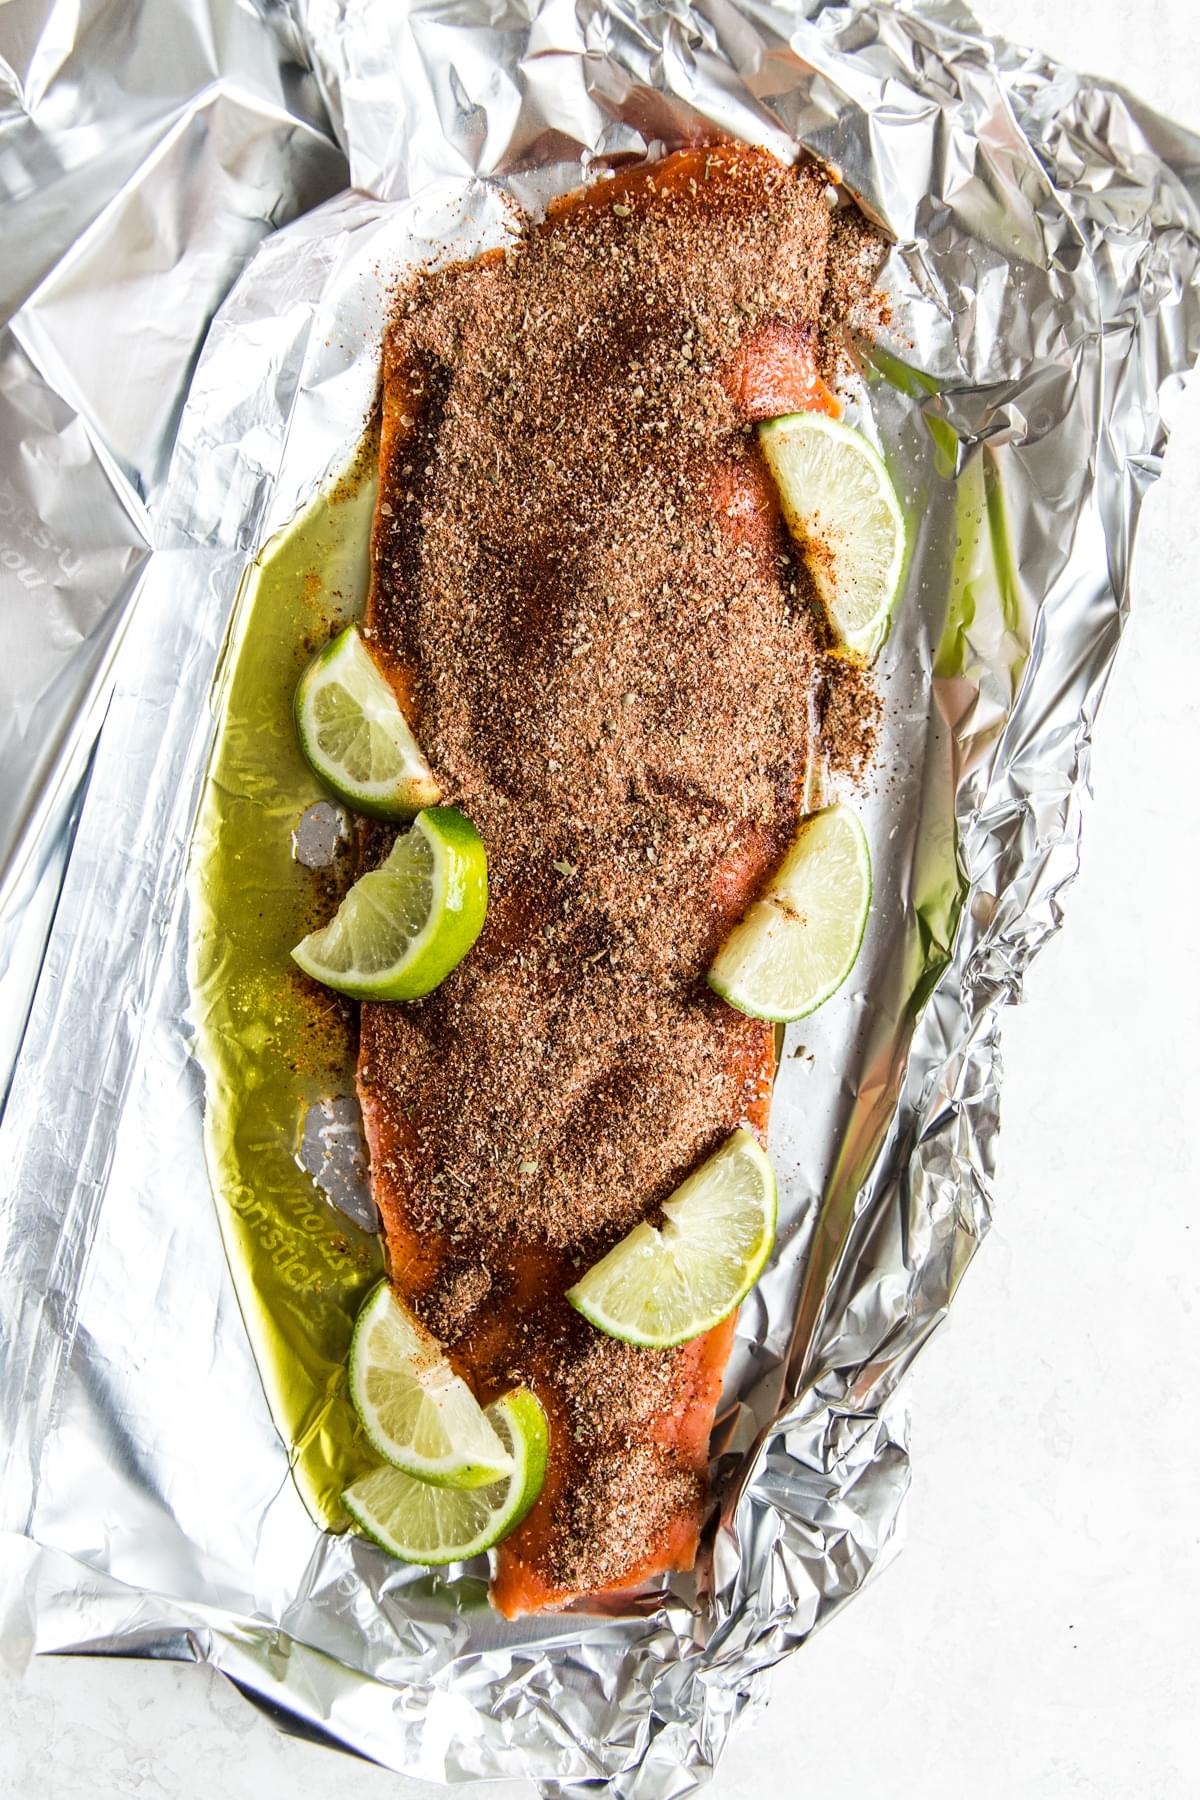 A fillet of salmon in foil with taco seasoning, limes and olive oil